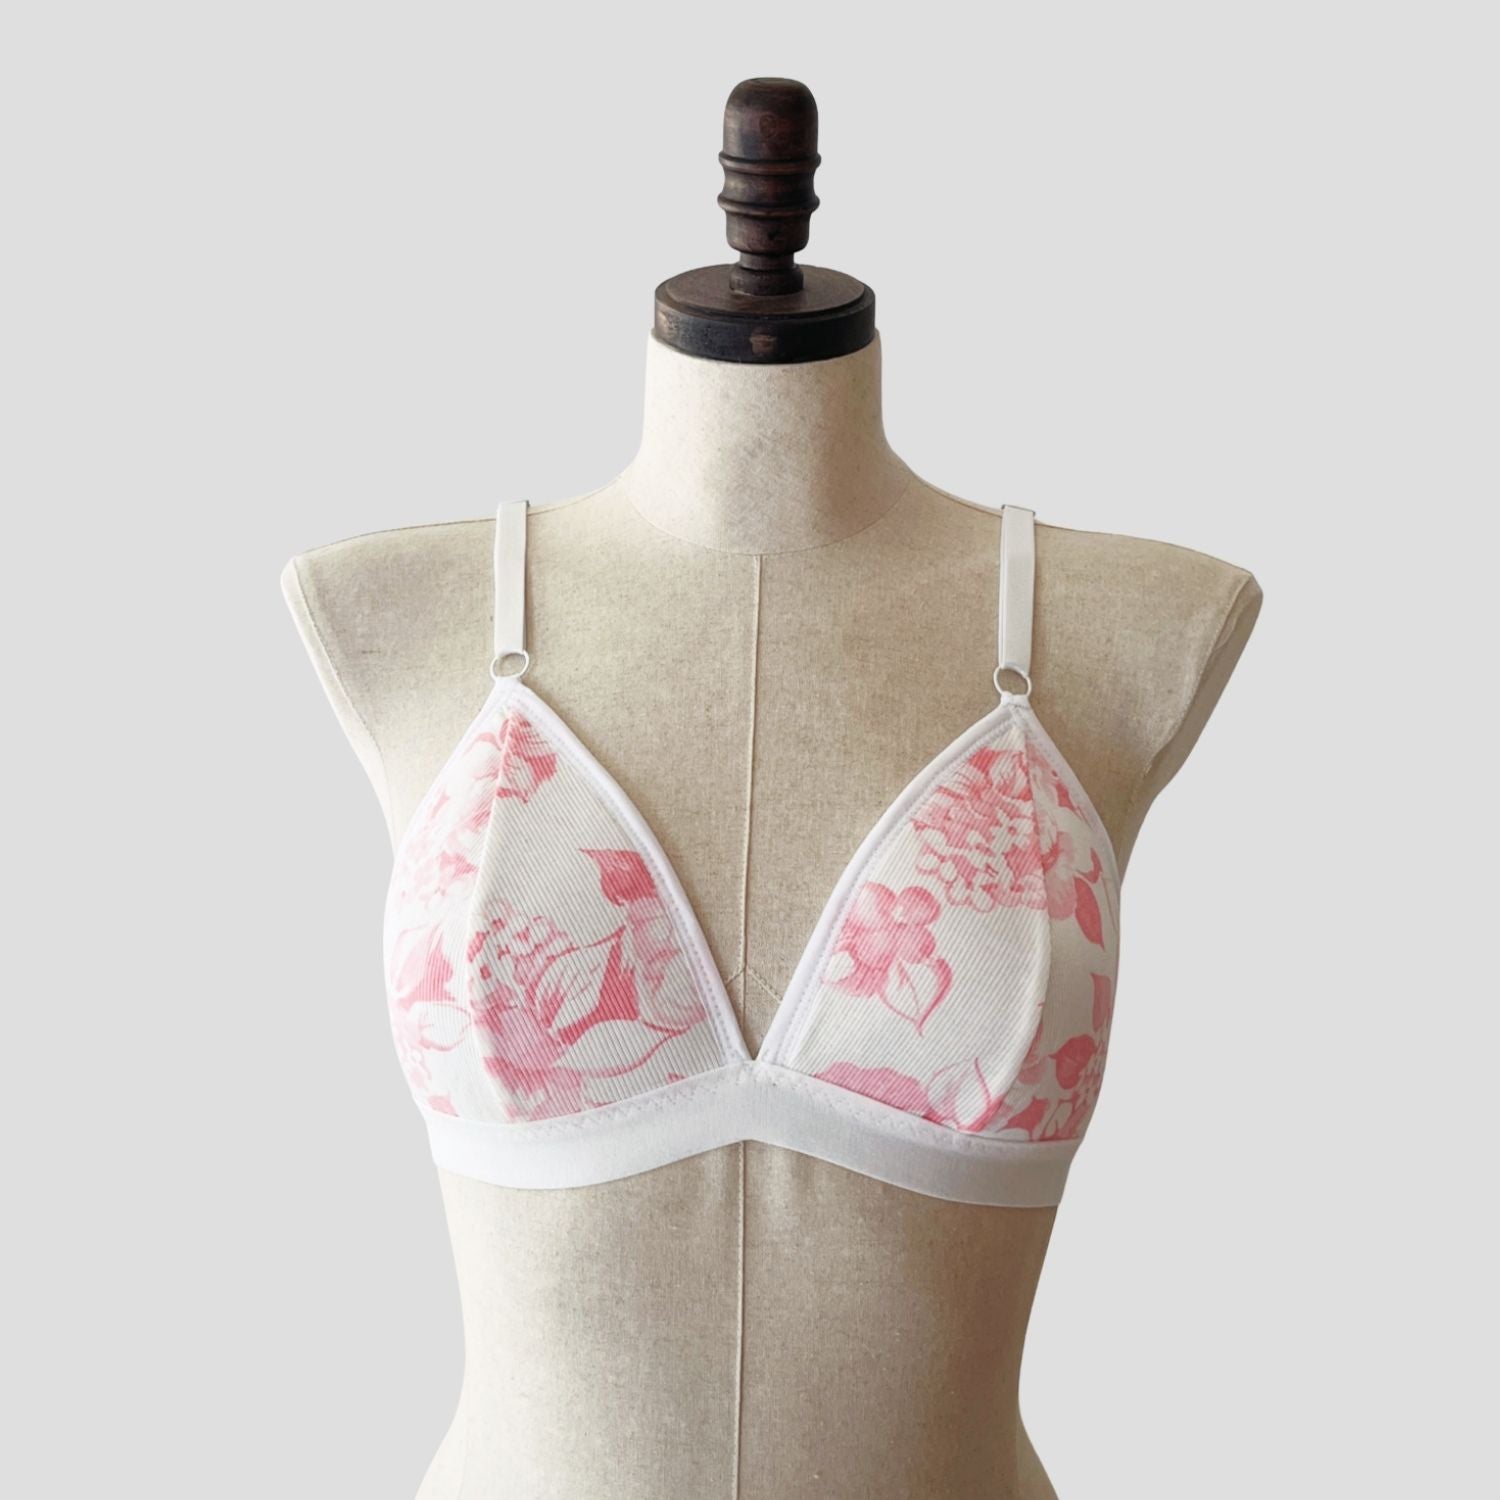 made in Canada women's bras and bralettes